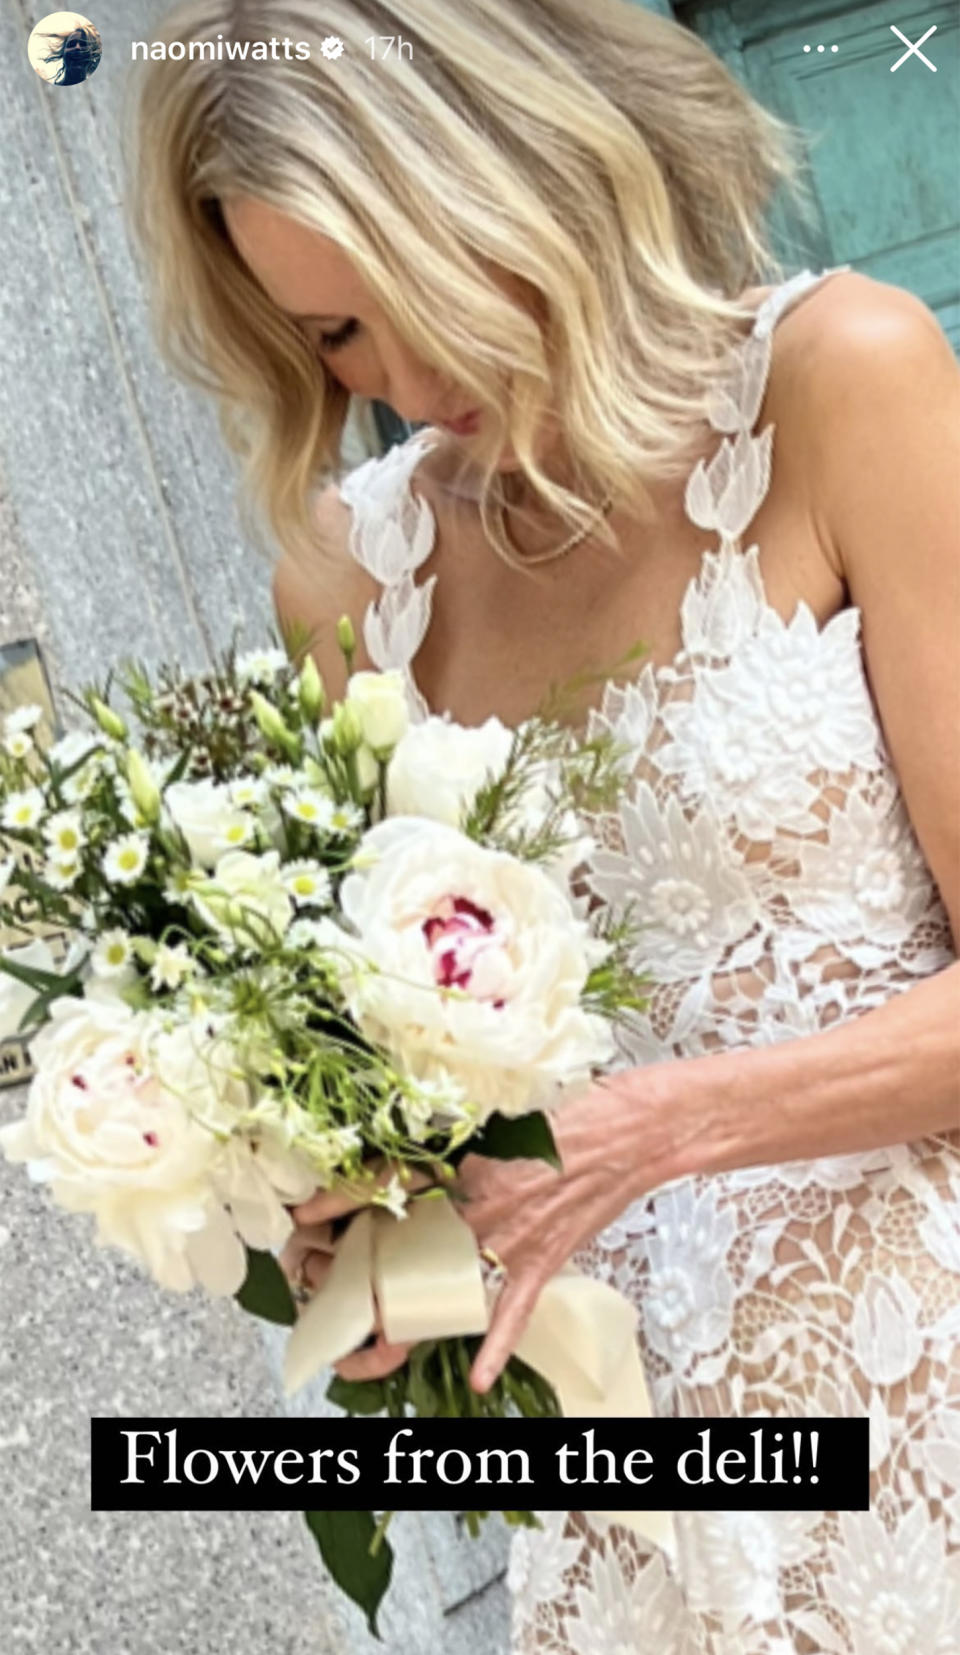 Naomi Watts looked striking in head to toe white lace, holding a bouquet of a variety of white flowers tied in a yellow bow. (Naomi Watts / Instagram)